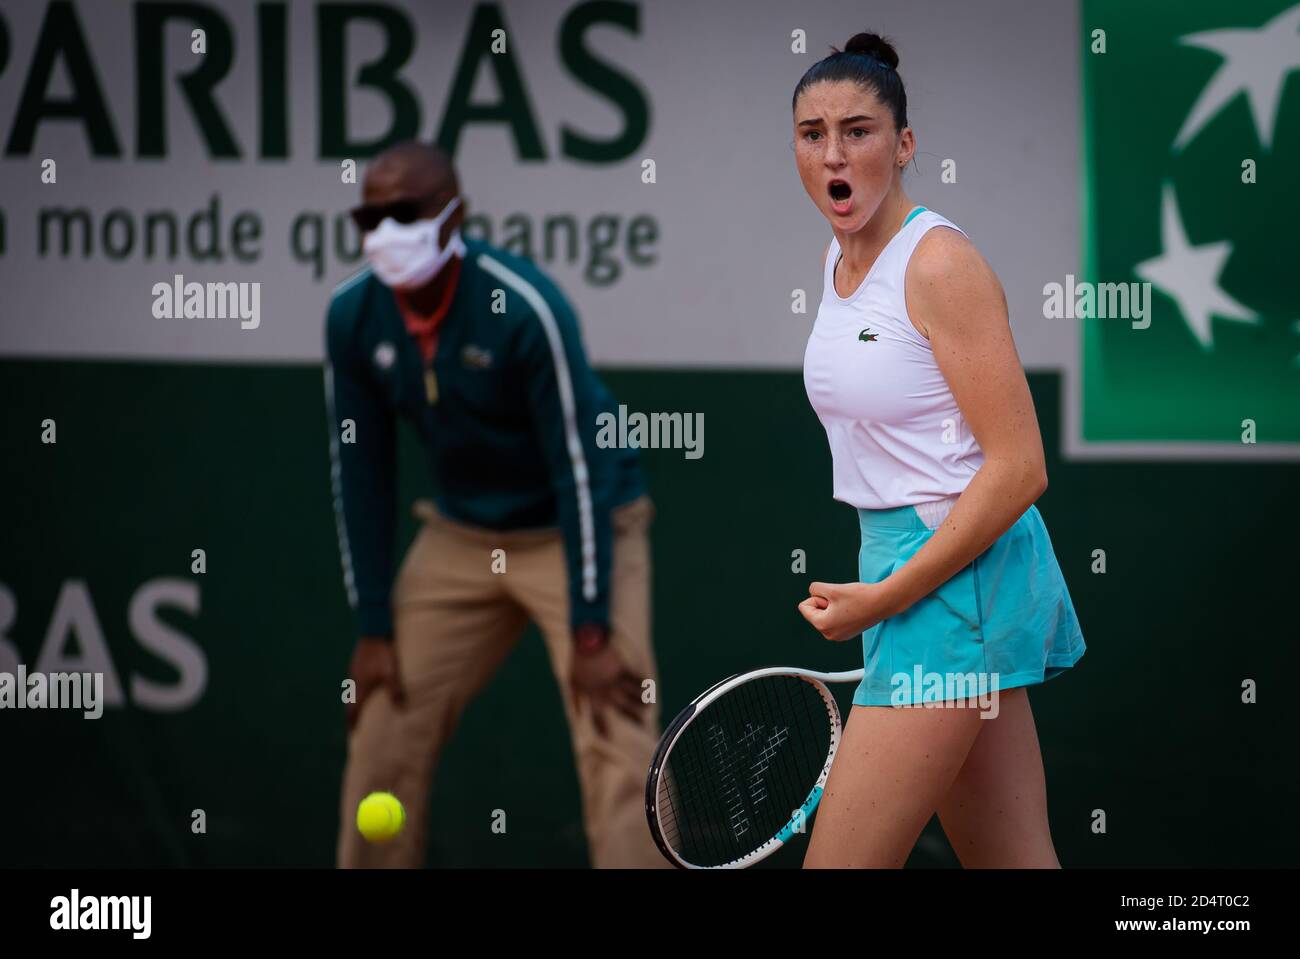 lsa Jacquemot of France in action against Alina Charaeva of Russia during the Juniors final of the Roland Garros 2020, Grand Slam tennis tournament, Stock Photo